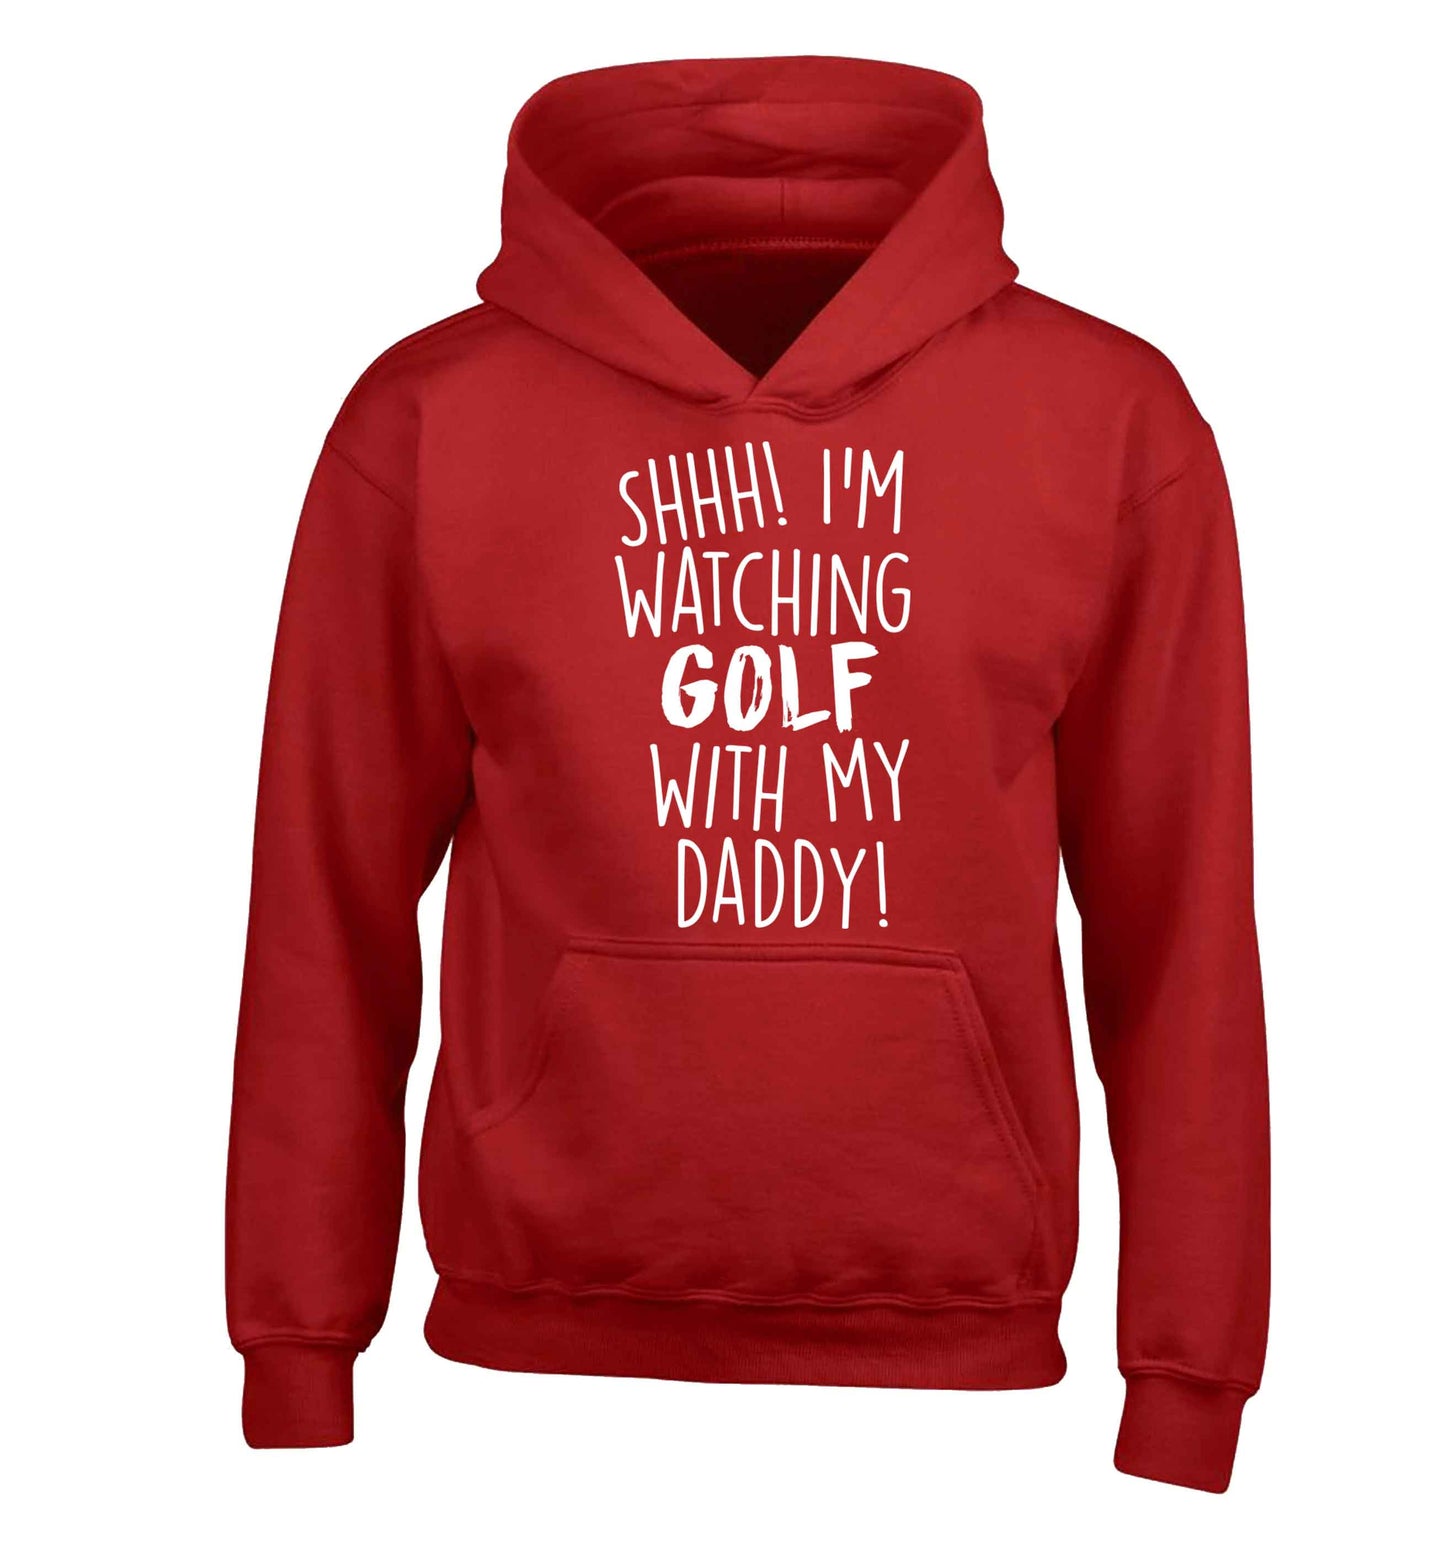 Shh I'm watching golf with my daddy children's red hoodie 12-13 Years